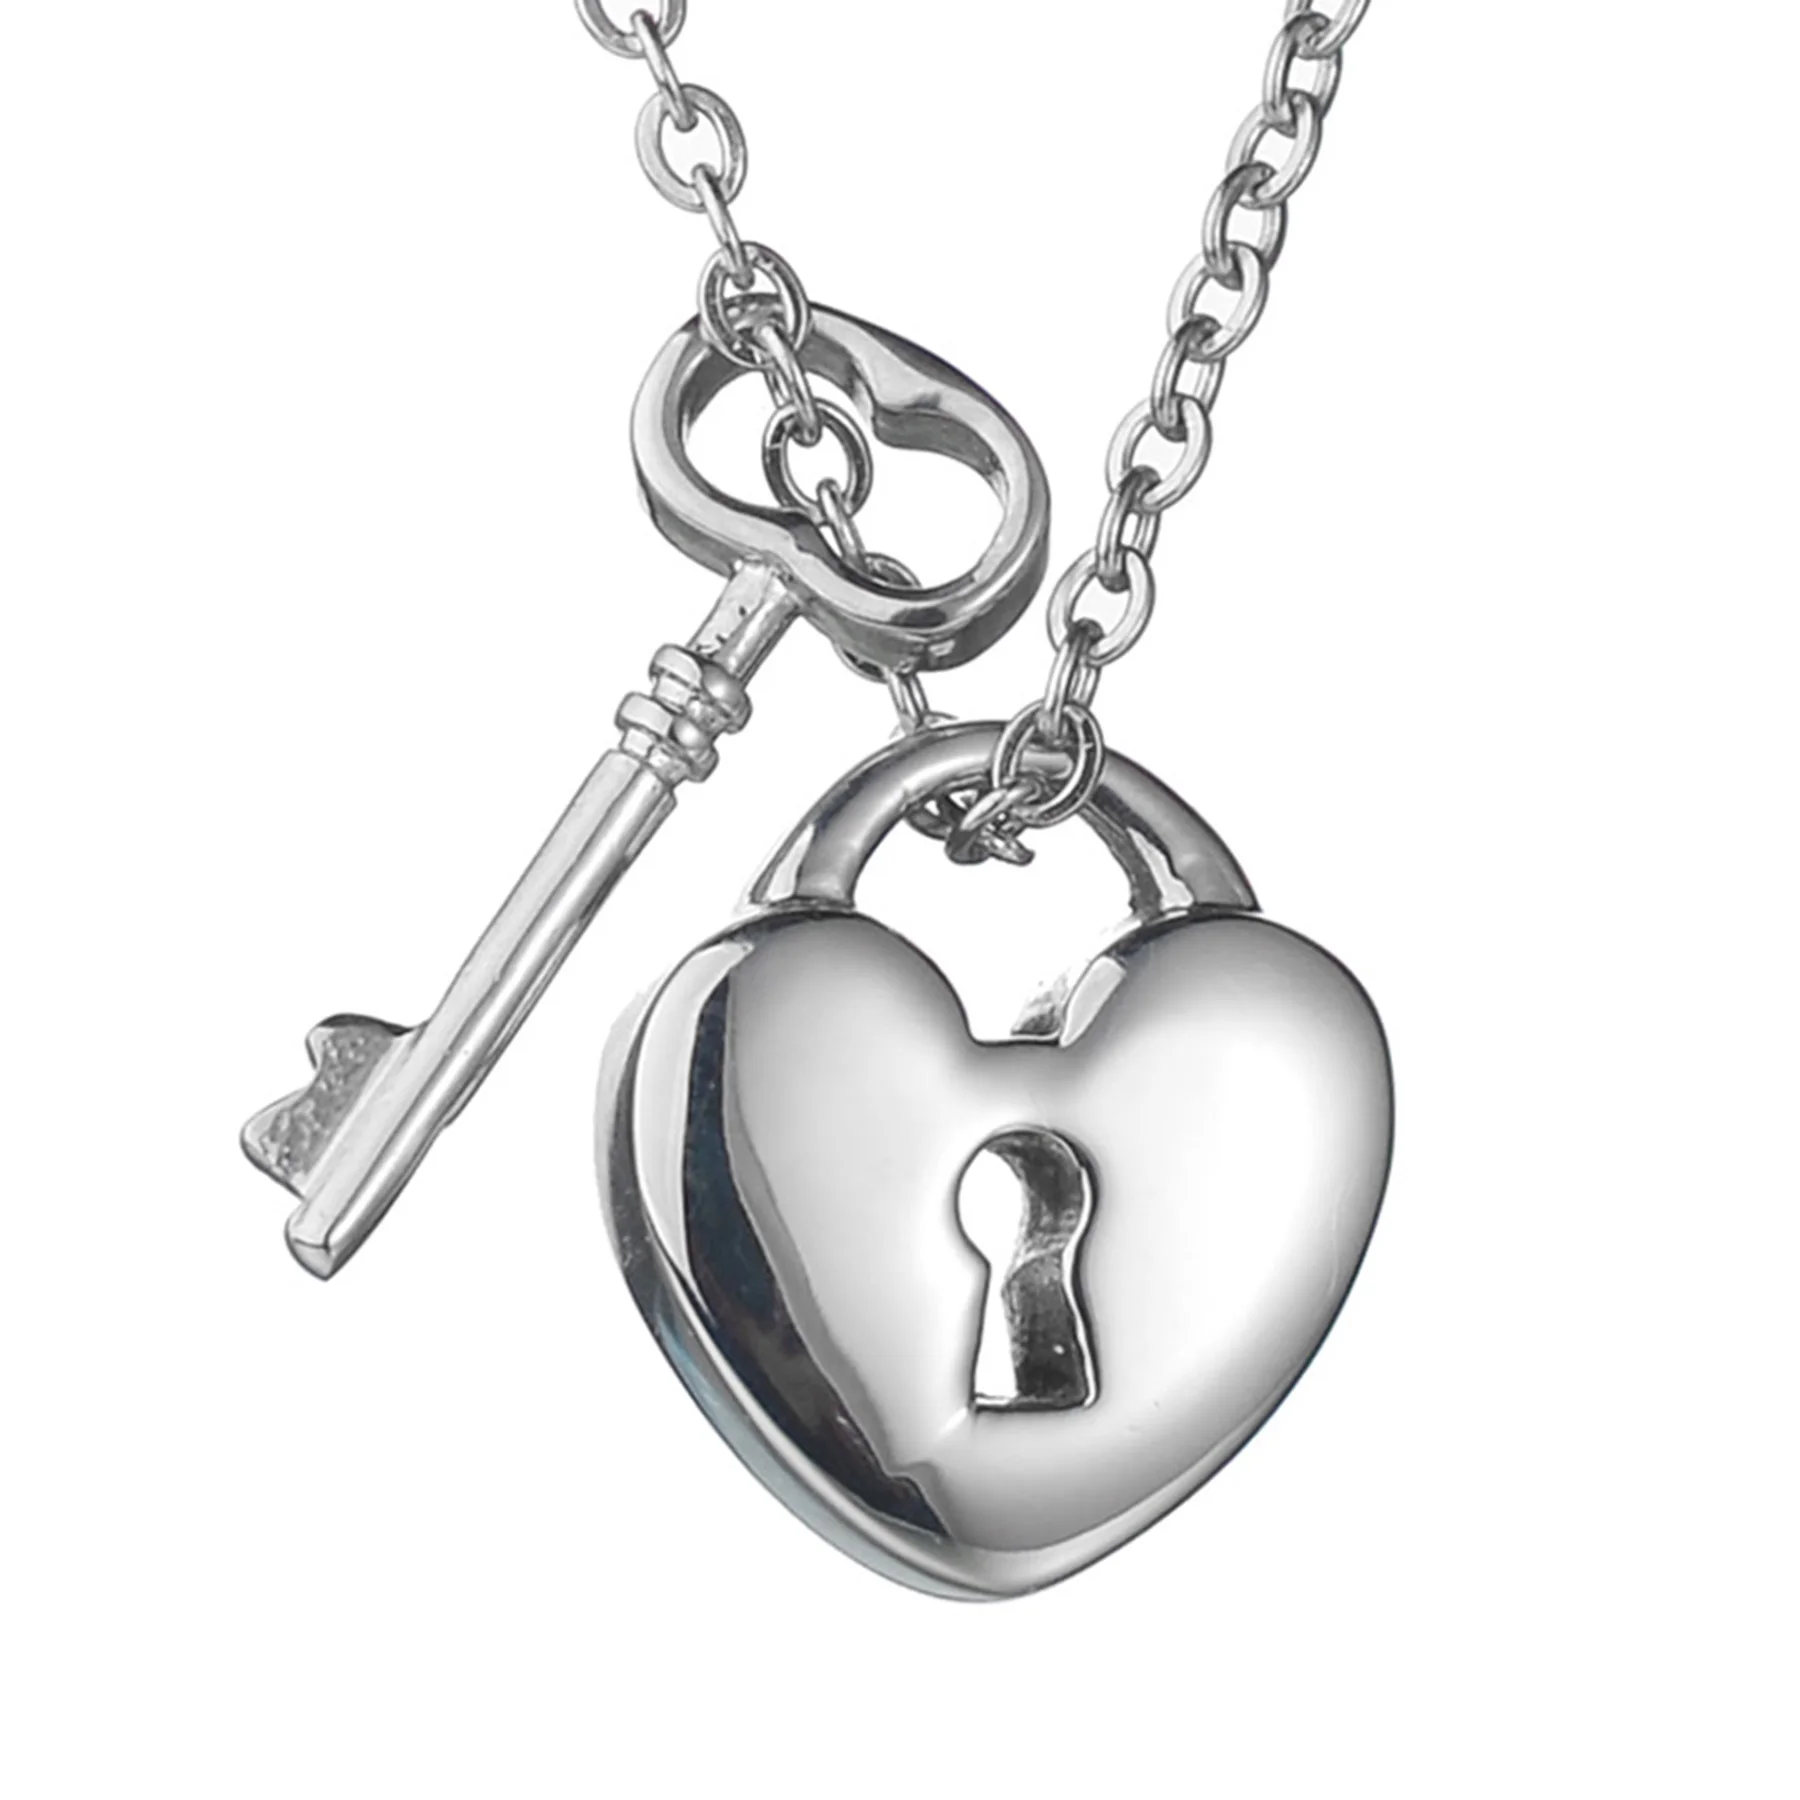 

Lock Heart Cremation Urn Pendant with A Key Stainless Steel Memorial Padlock Necklace Ashes Holder Keepsake Jewelry